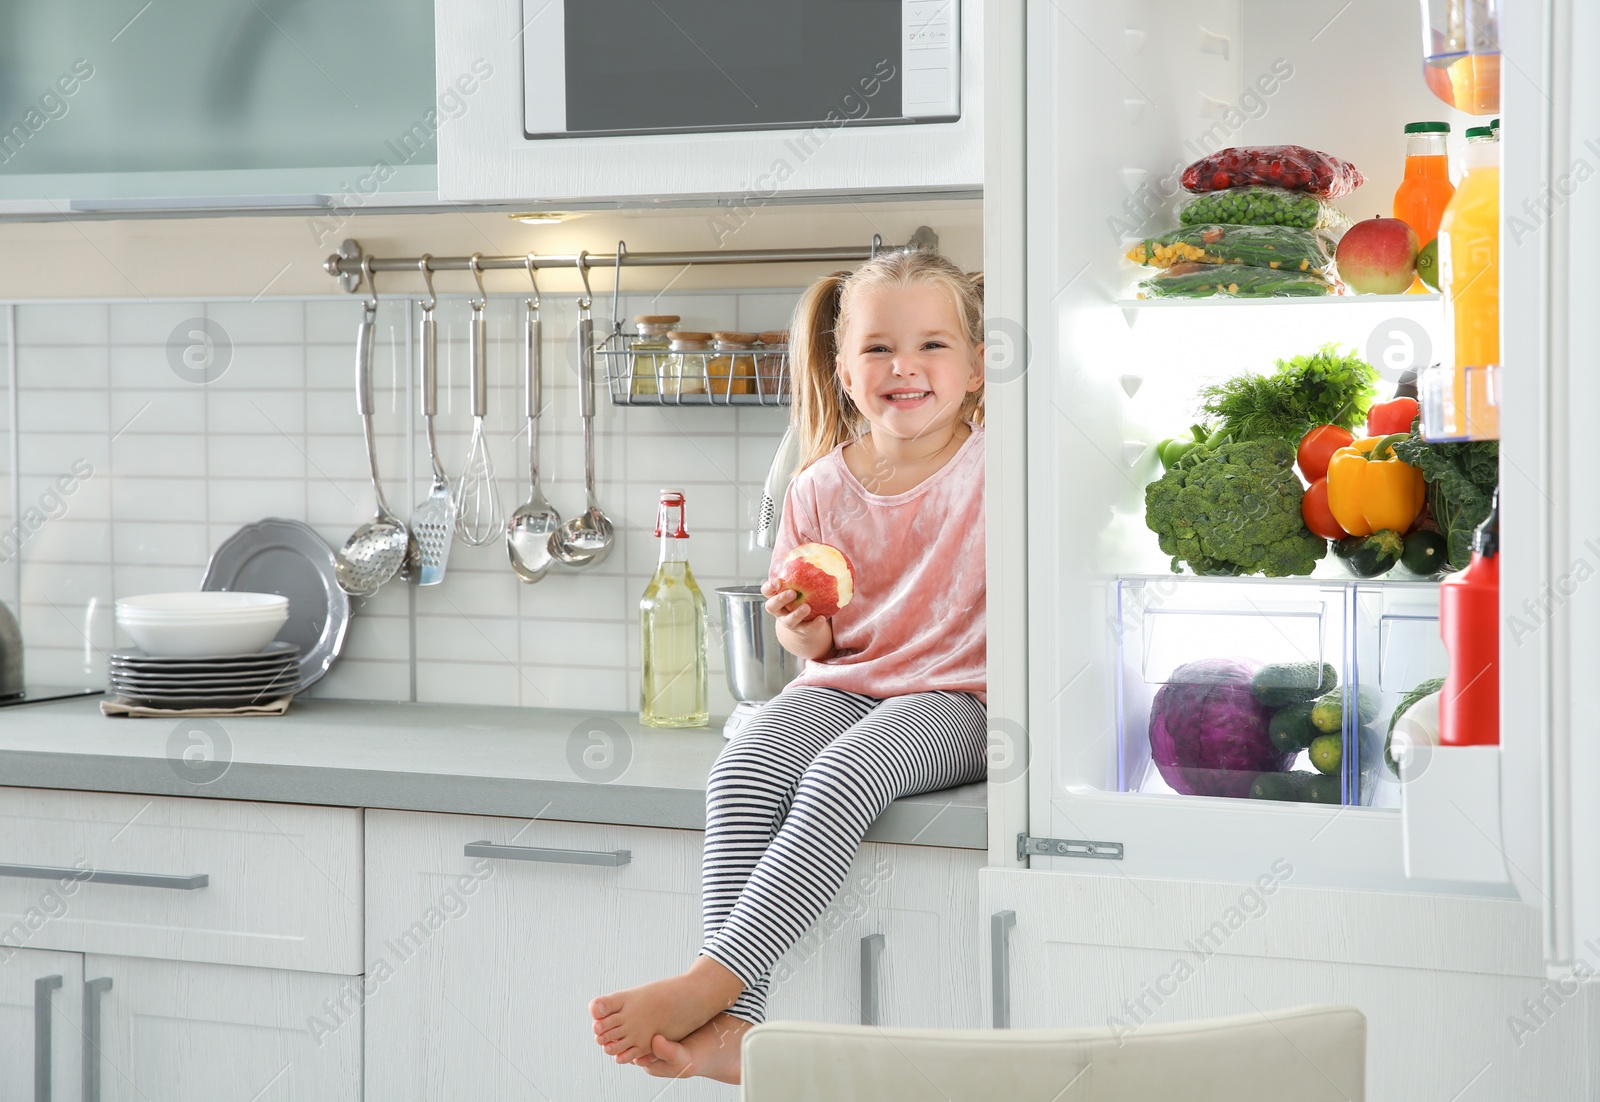 Photo of Cute little girl with apple sitting near open refrigerator in kitchen